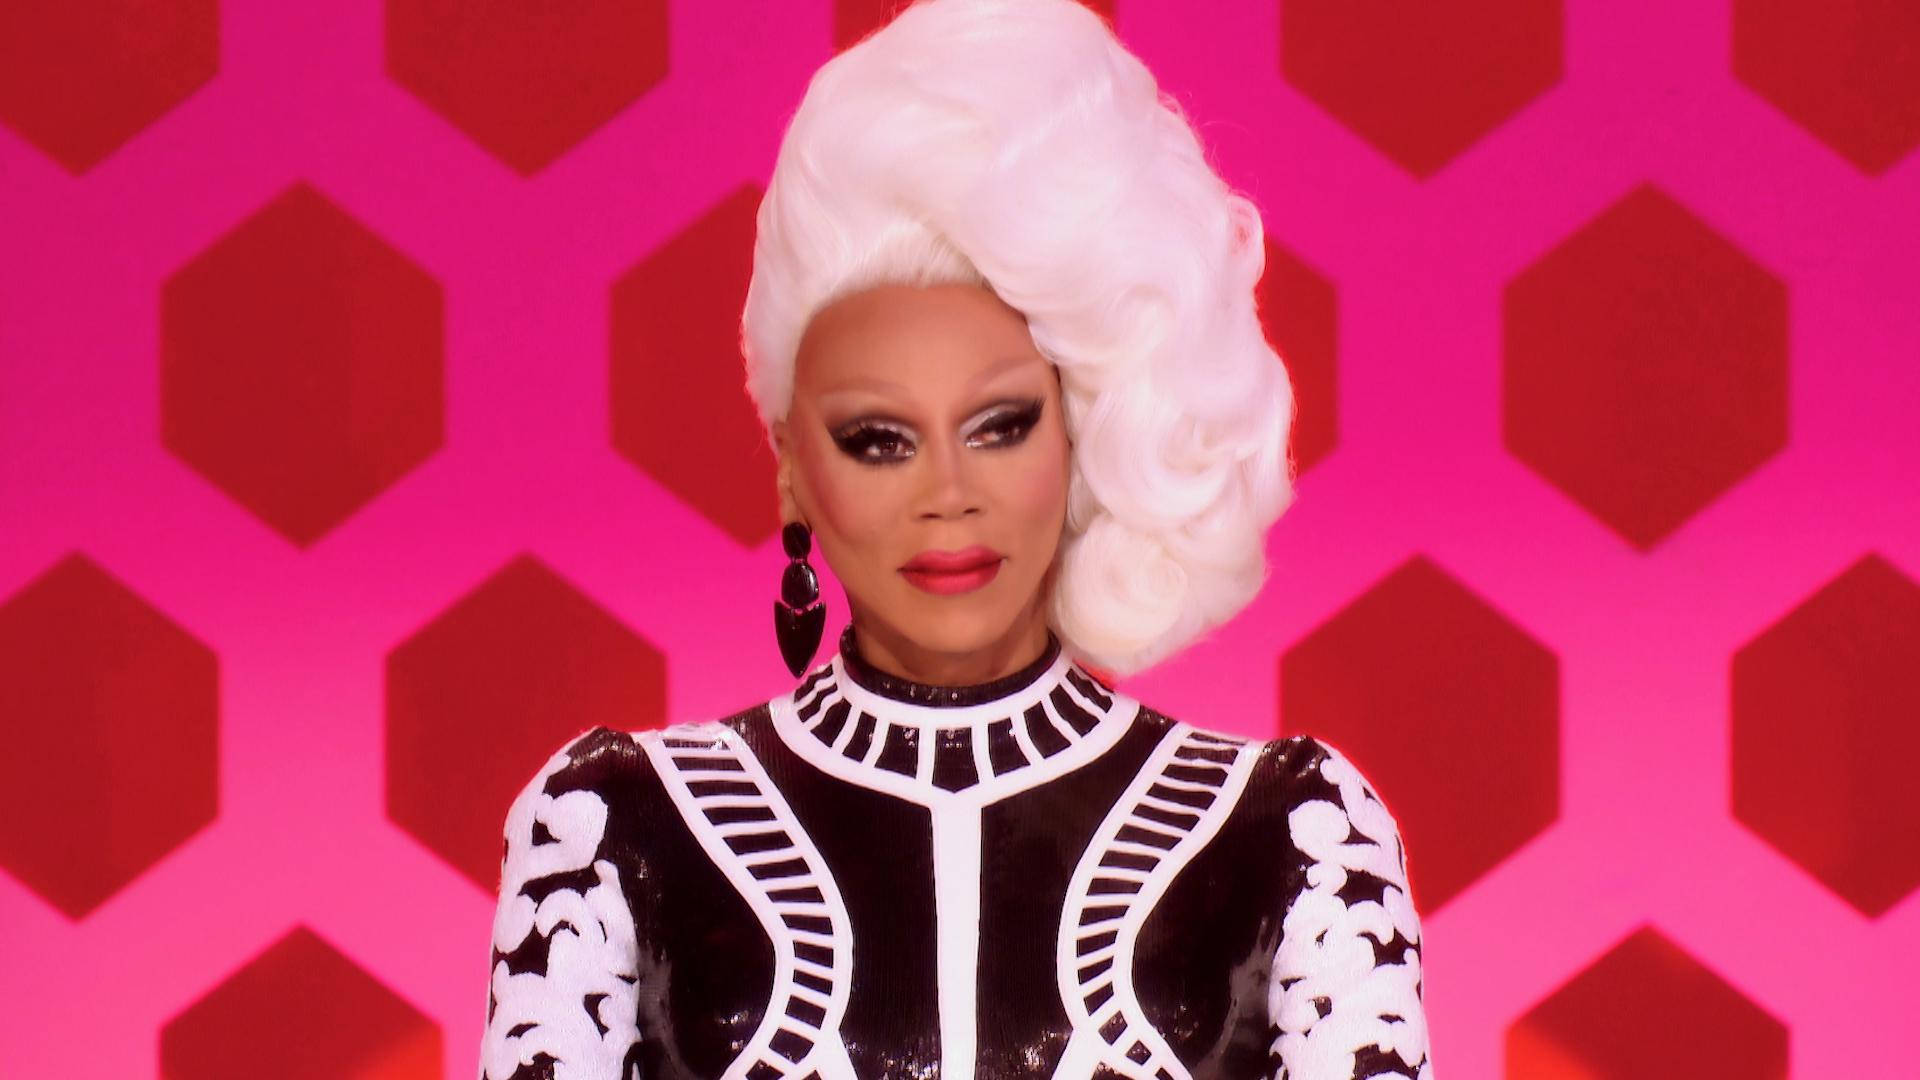 Rupaul's Drag Race Pink Red Background Background